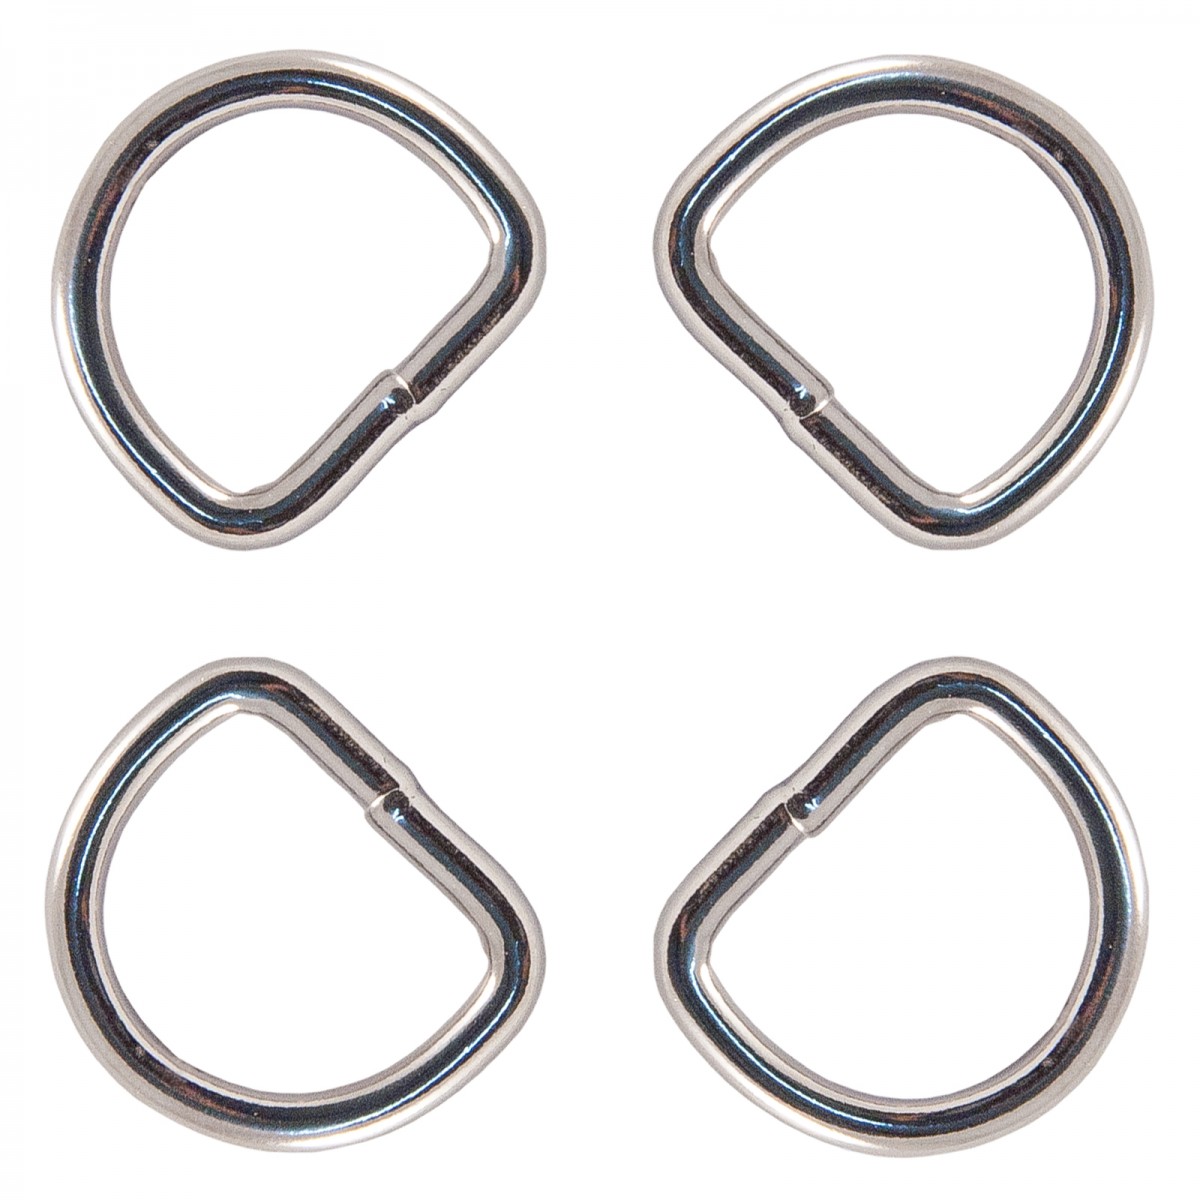 Welded Metal D Rings 1 Inch Sturdy Heavy Duty Solid Steel Seamless Molded  Sewing D Shape Ring (Silver 10Pcs)